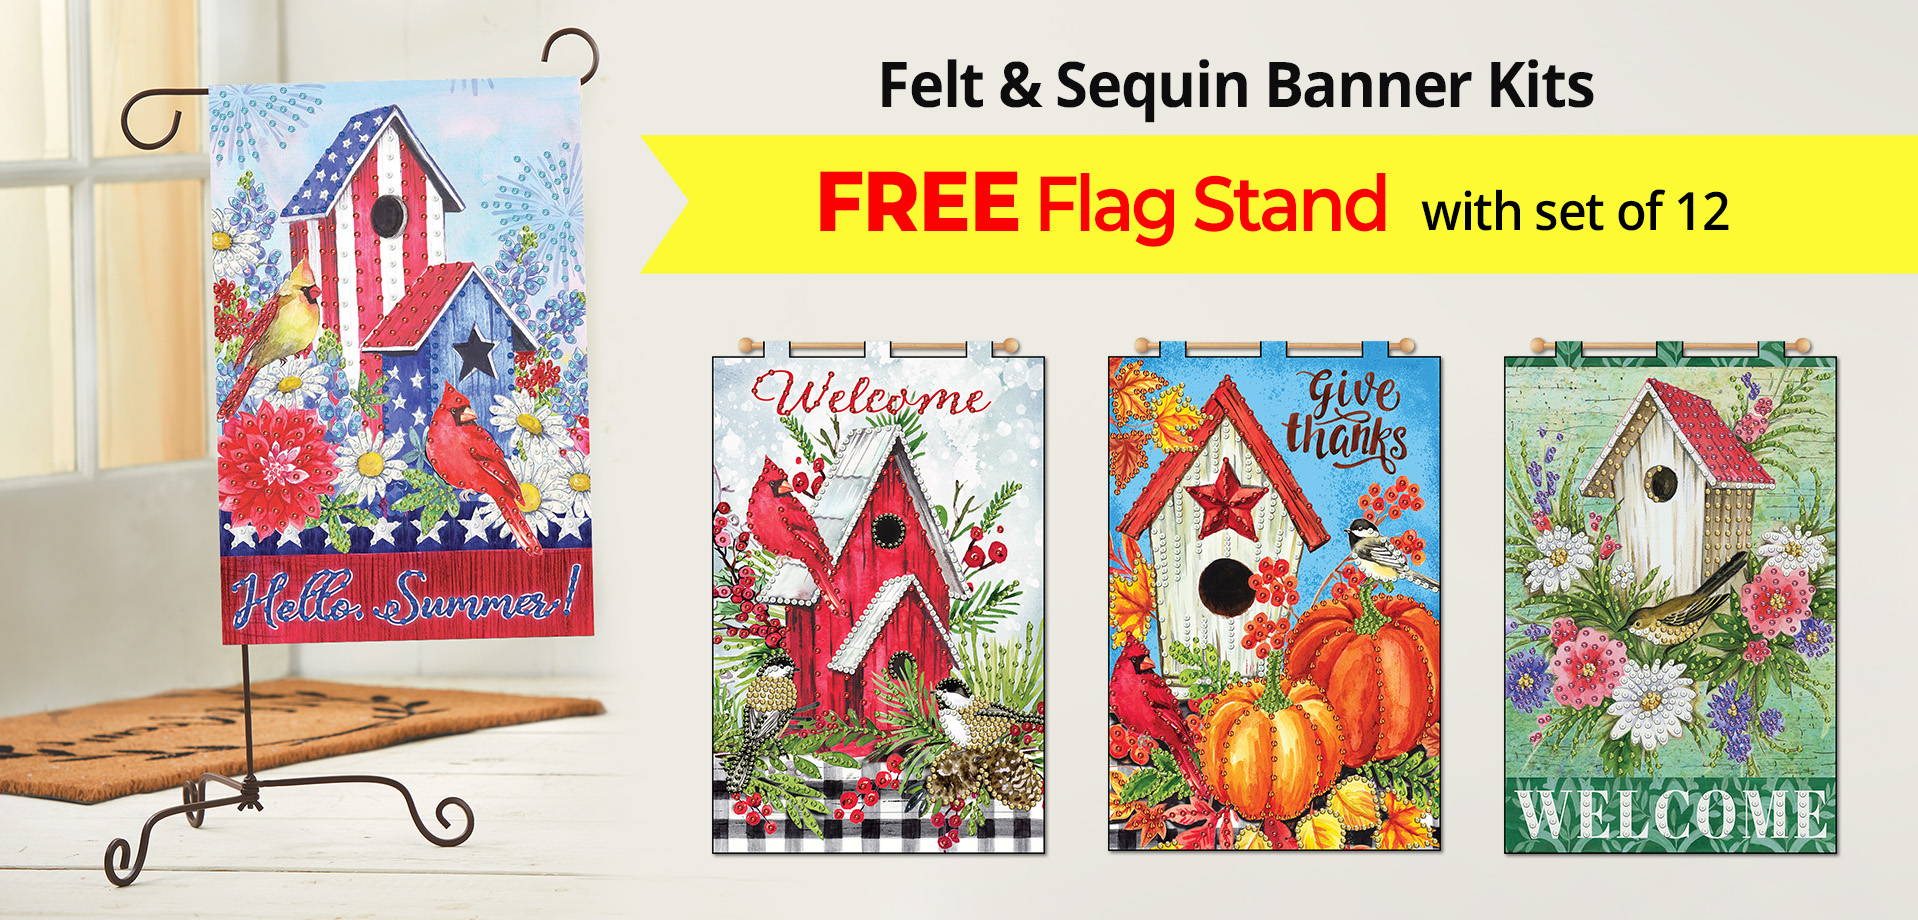 Text: Felt & Sequin Banner Kits come with Free Flag Stand with set of 12. Image: 4 Selections from Design Works Monthly Banners.